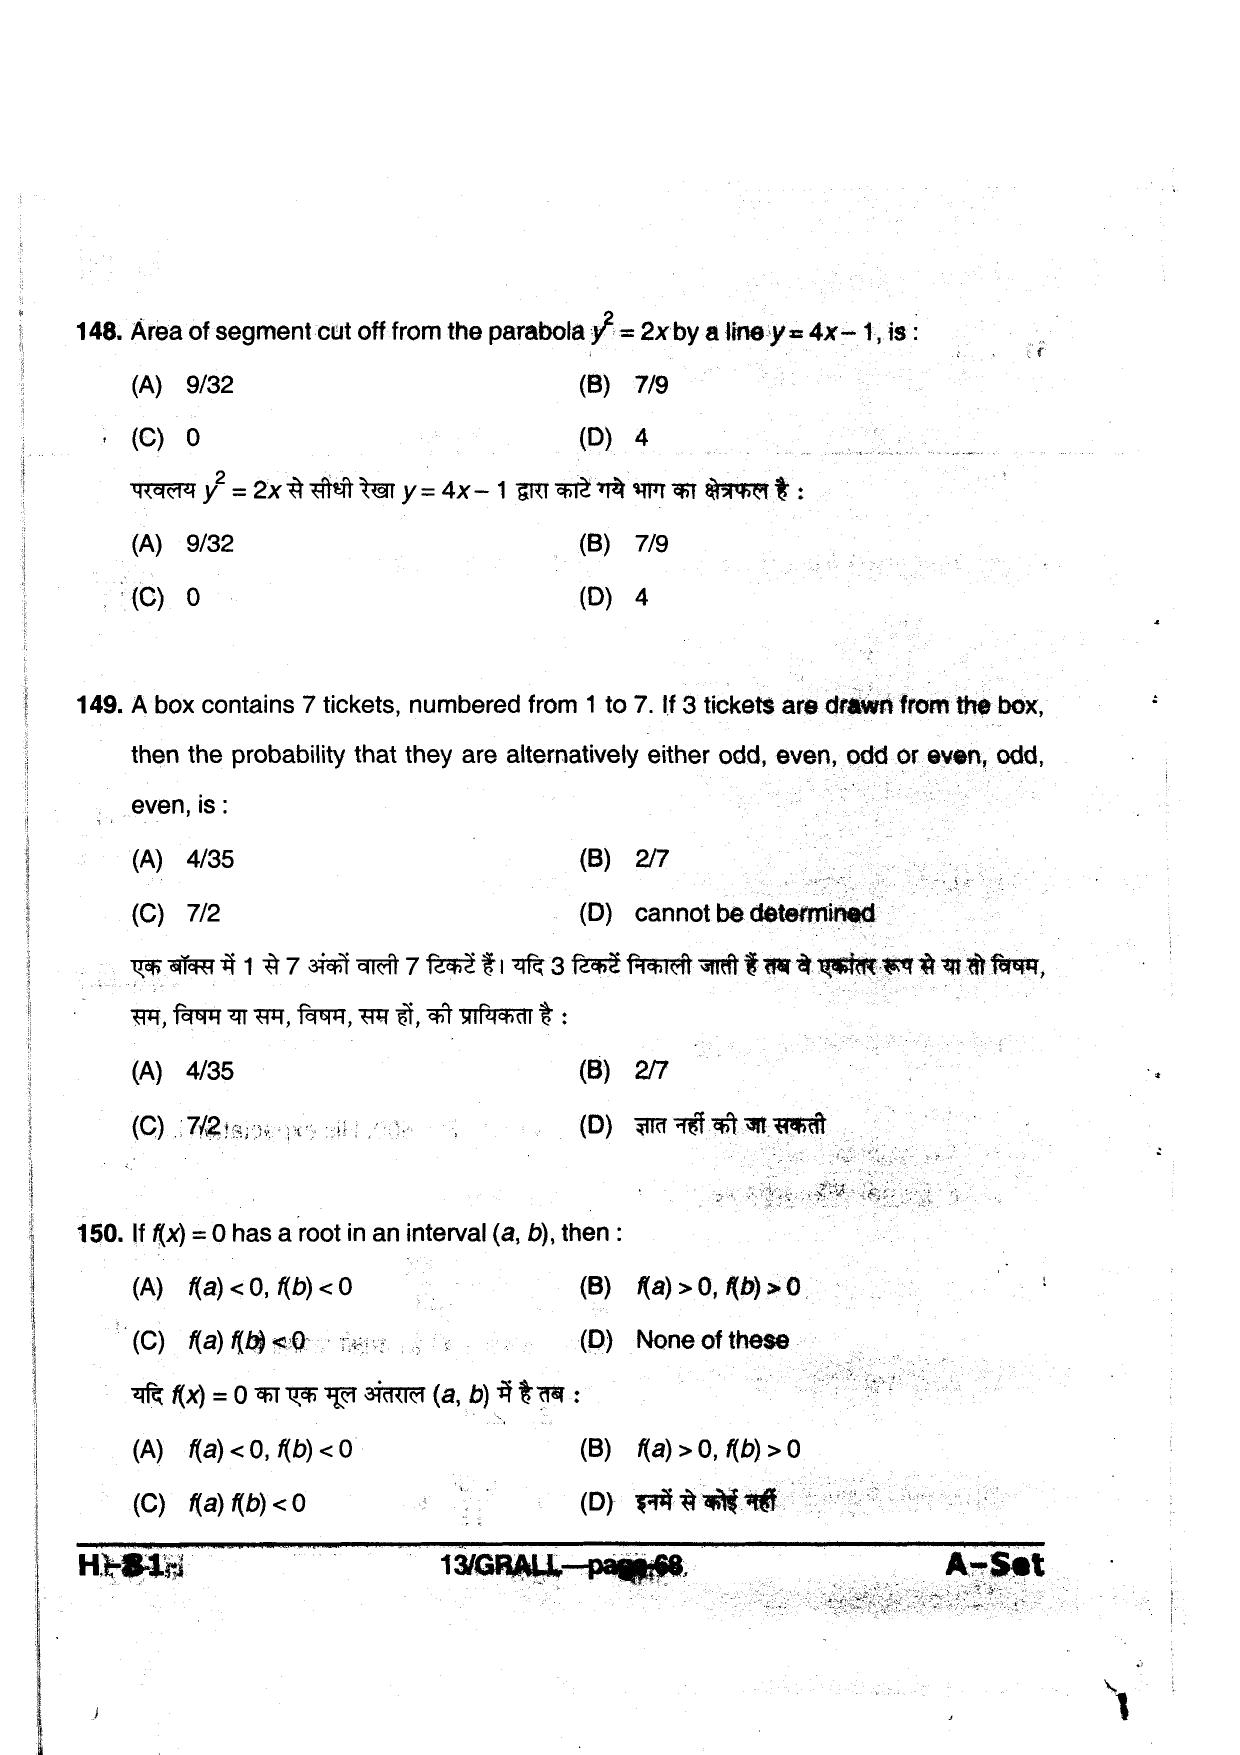 MP PAT 2013 Question Paper - Paper I - Page 68